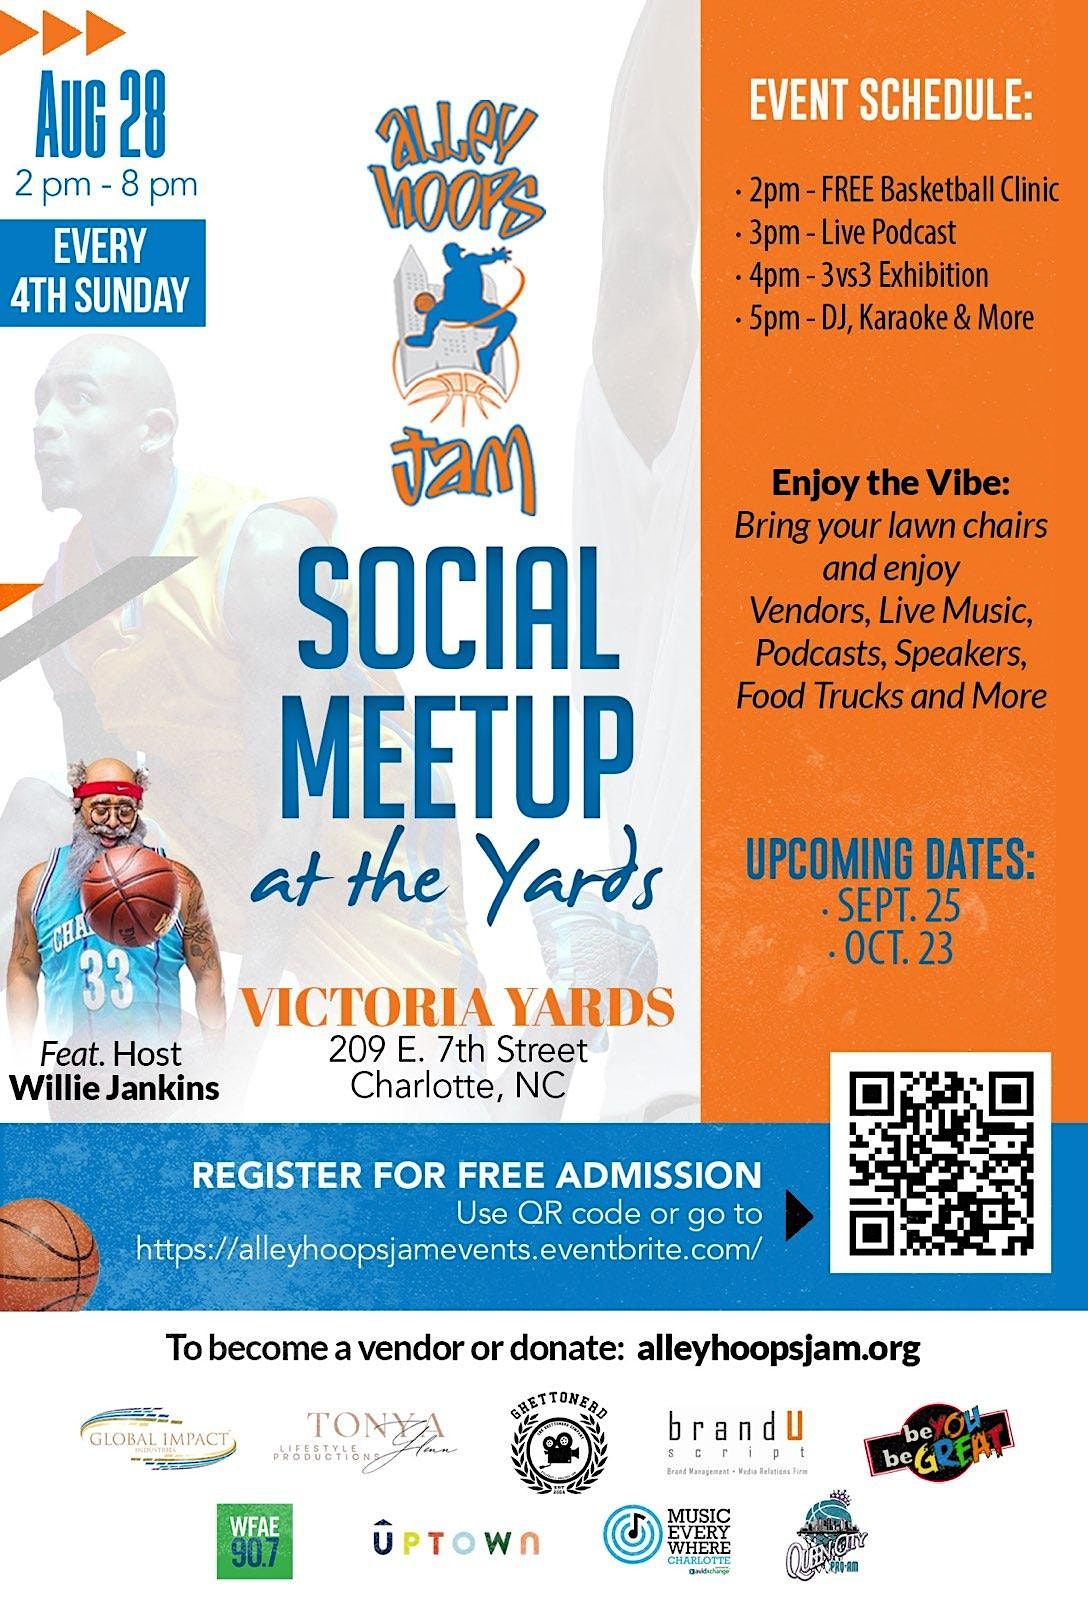 Alley Hoops Jam presents a SOCIAL MEETUP AT THE YARDS